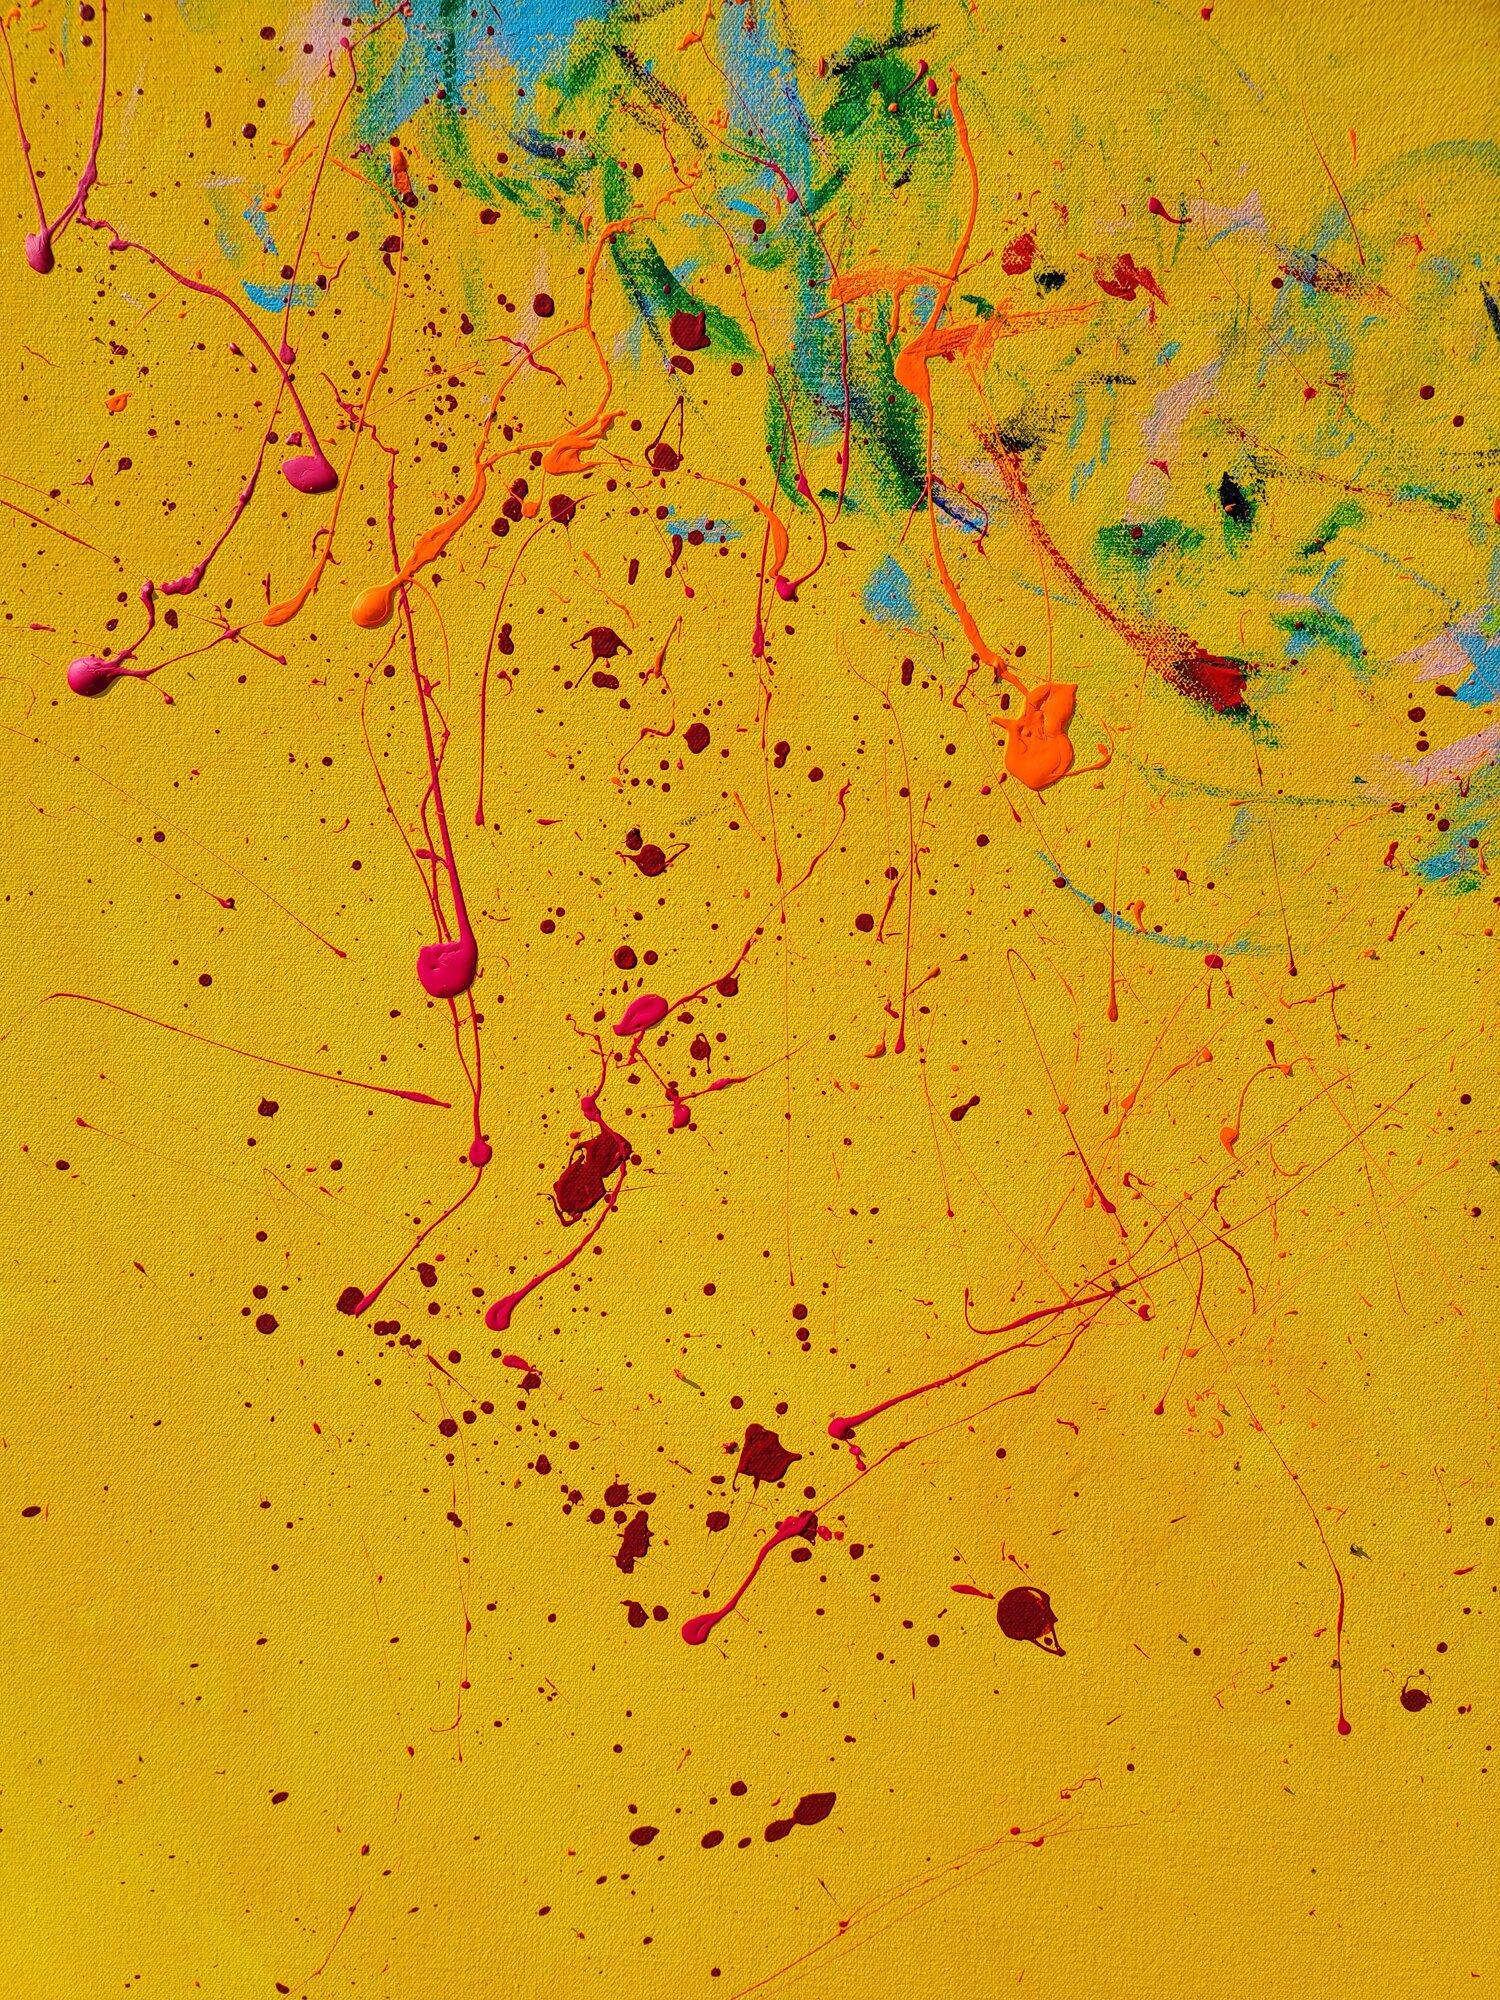 A Bright Momentum, Abstract Contemporary Acrylic Painting on Panel - Yellow Abstract Painting by Aida Murad